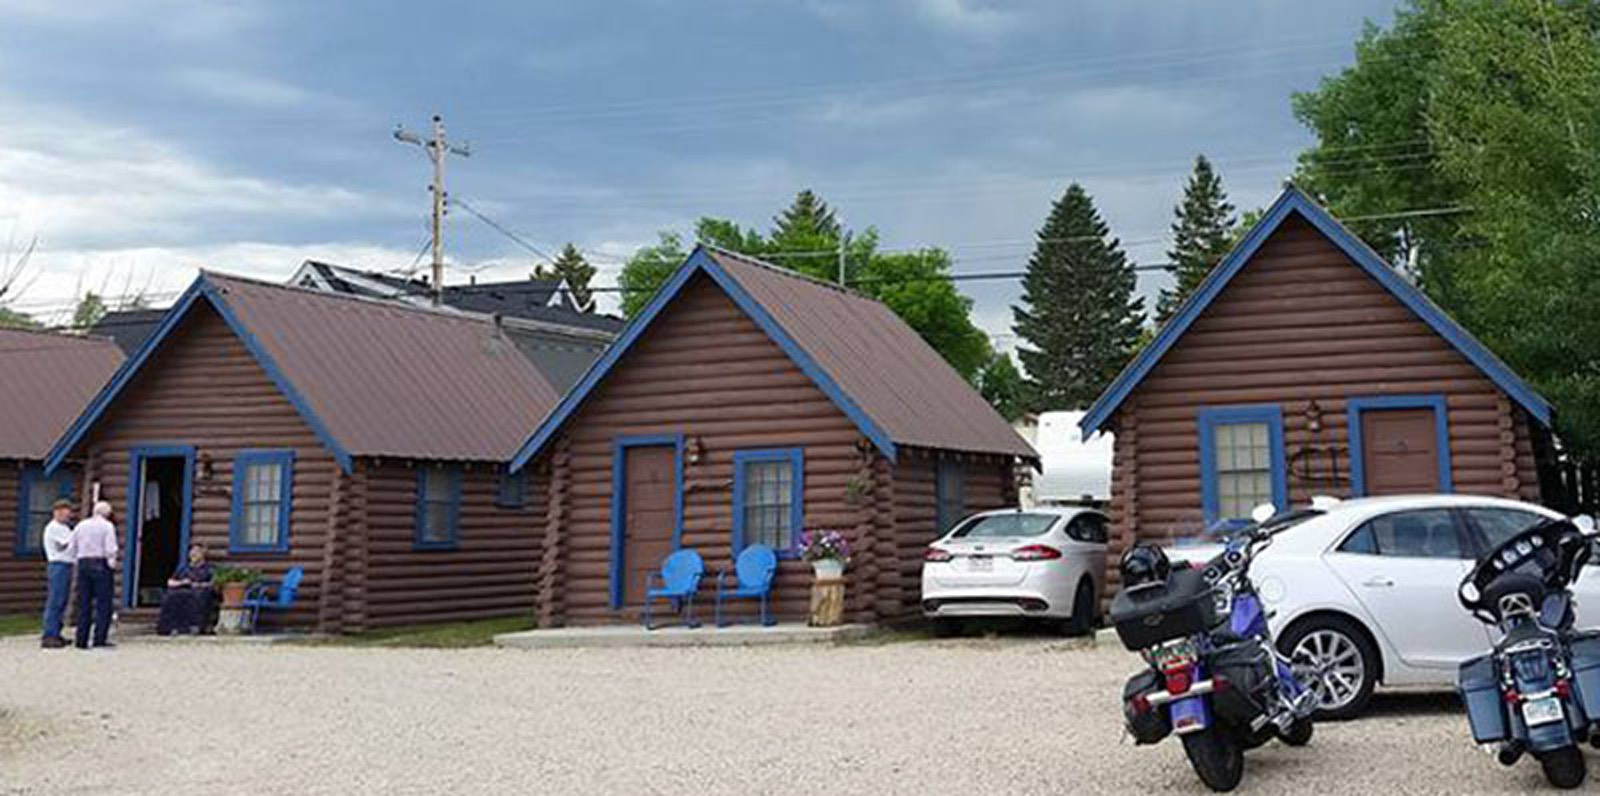 Blue Gables Motel and Coffee Shop